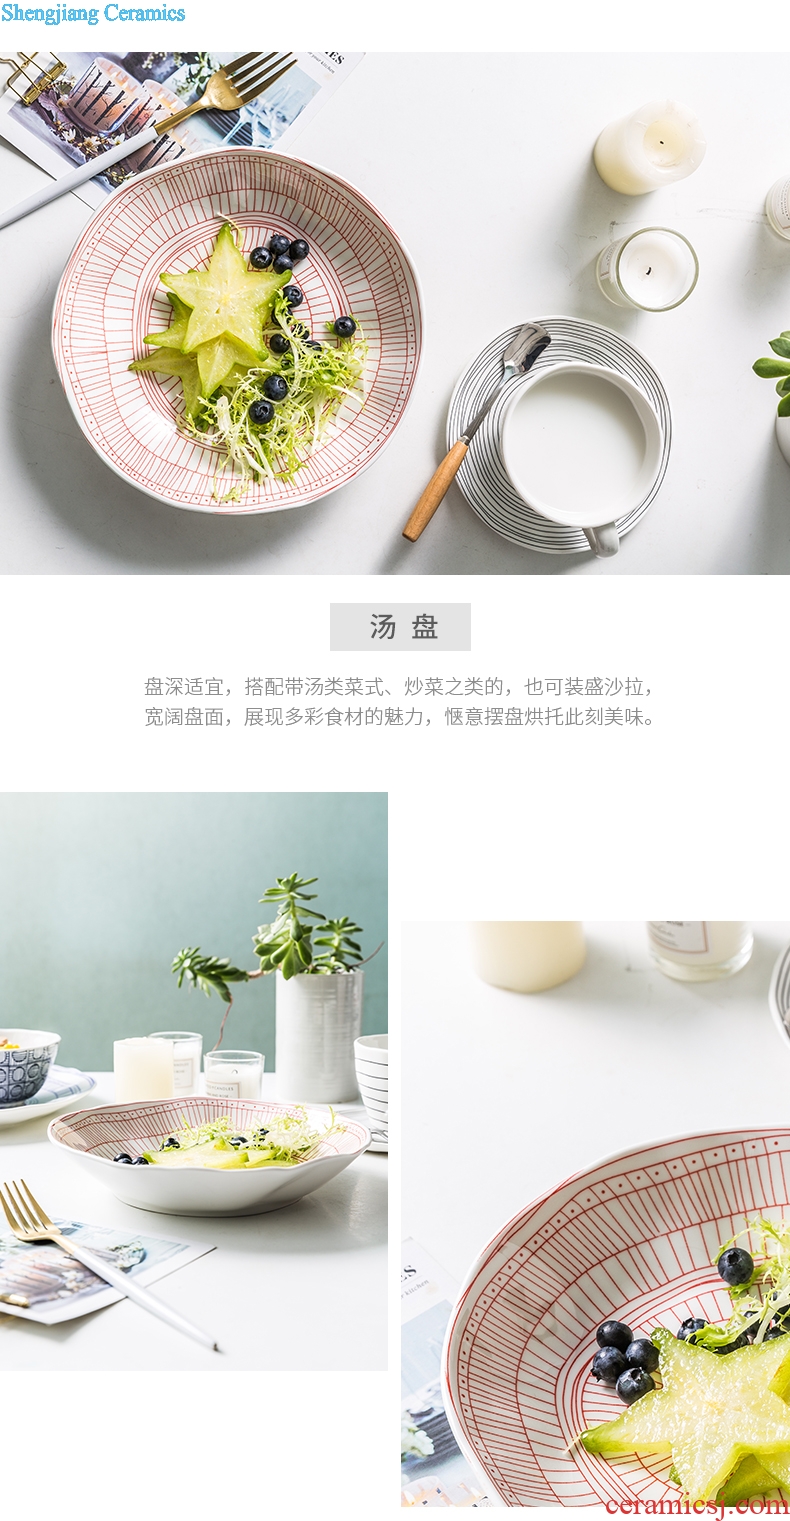 Million jia creative ceramic large soup bowl rainbow noodle bowl household contracted salad bowl personality thread FanPan soup plate printing color